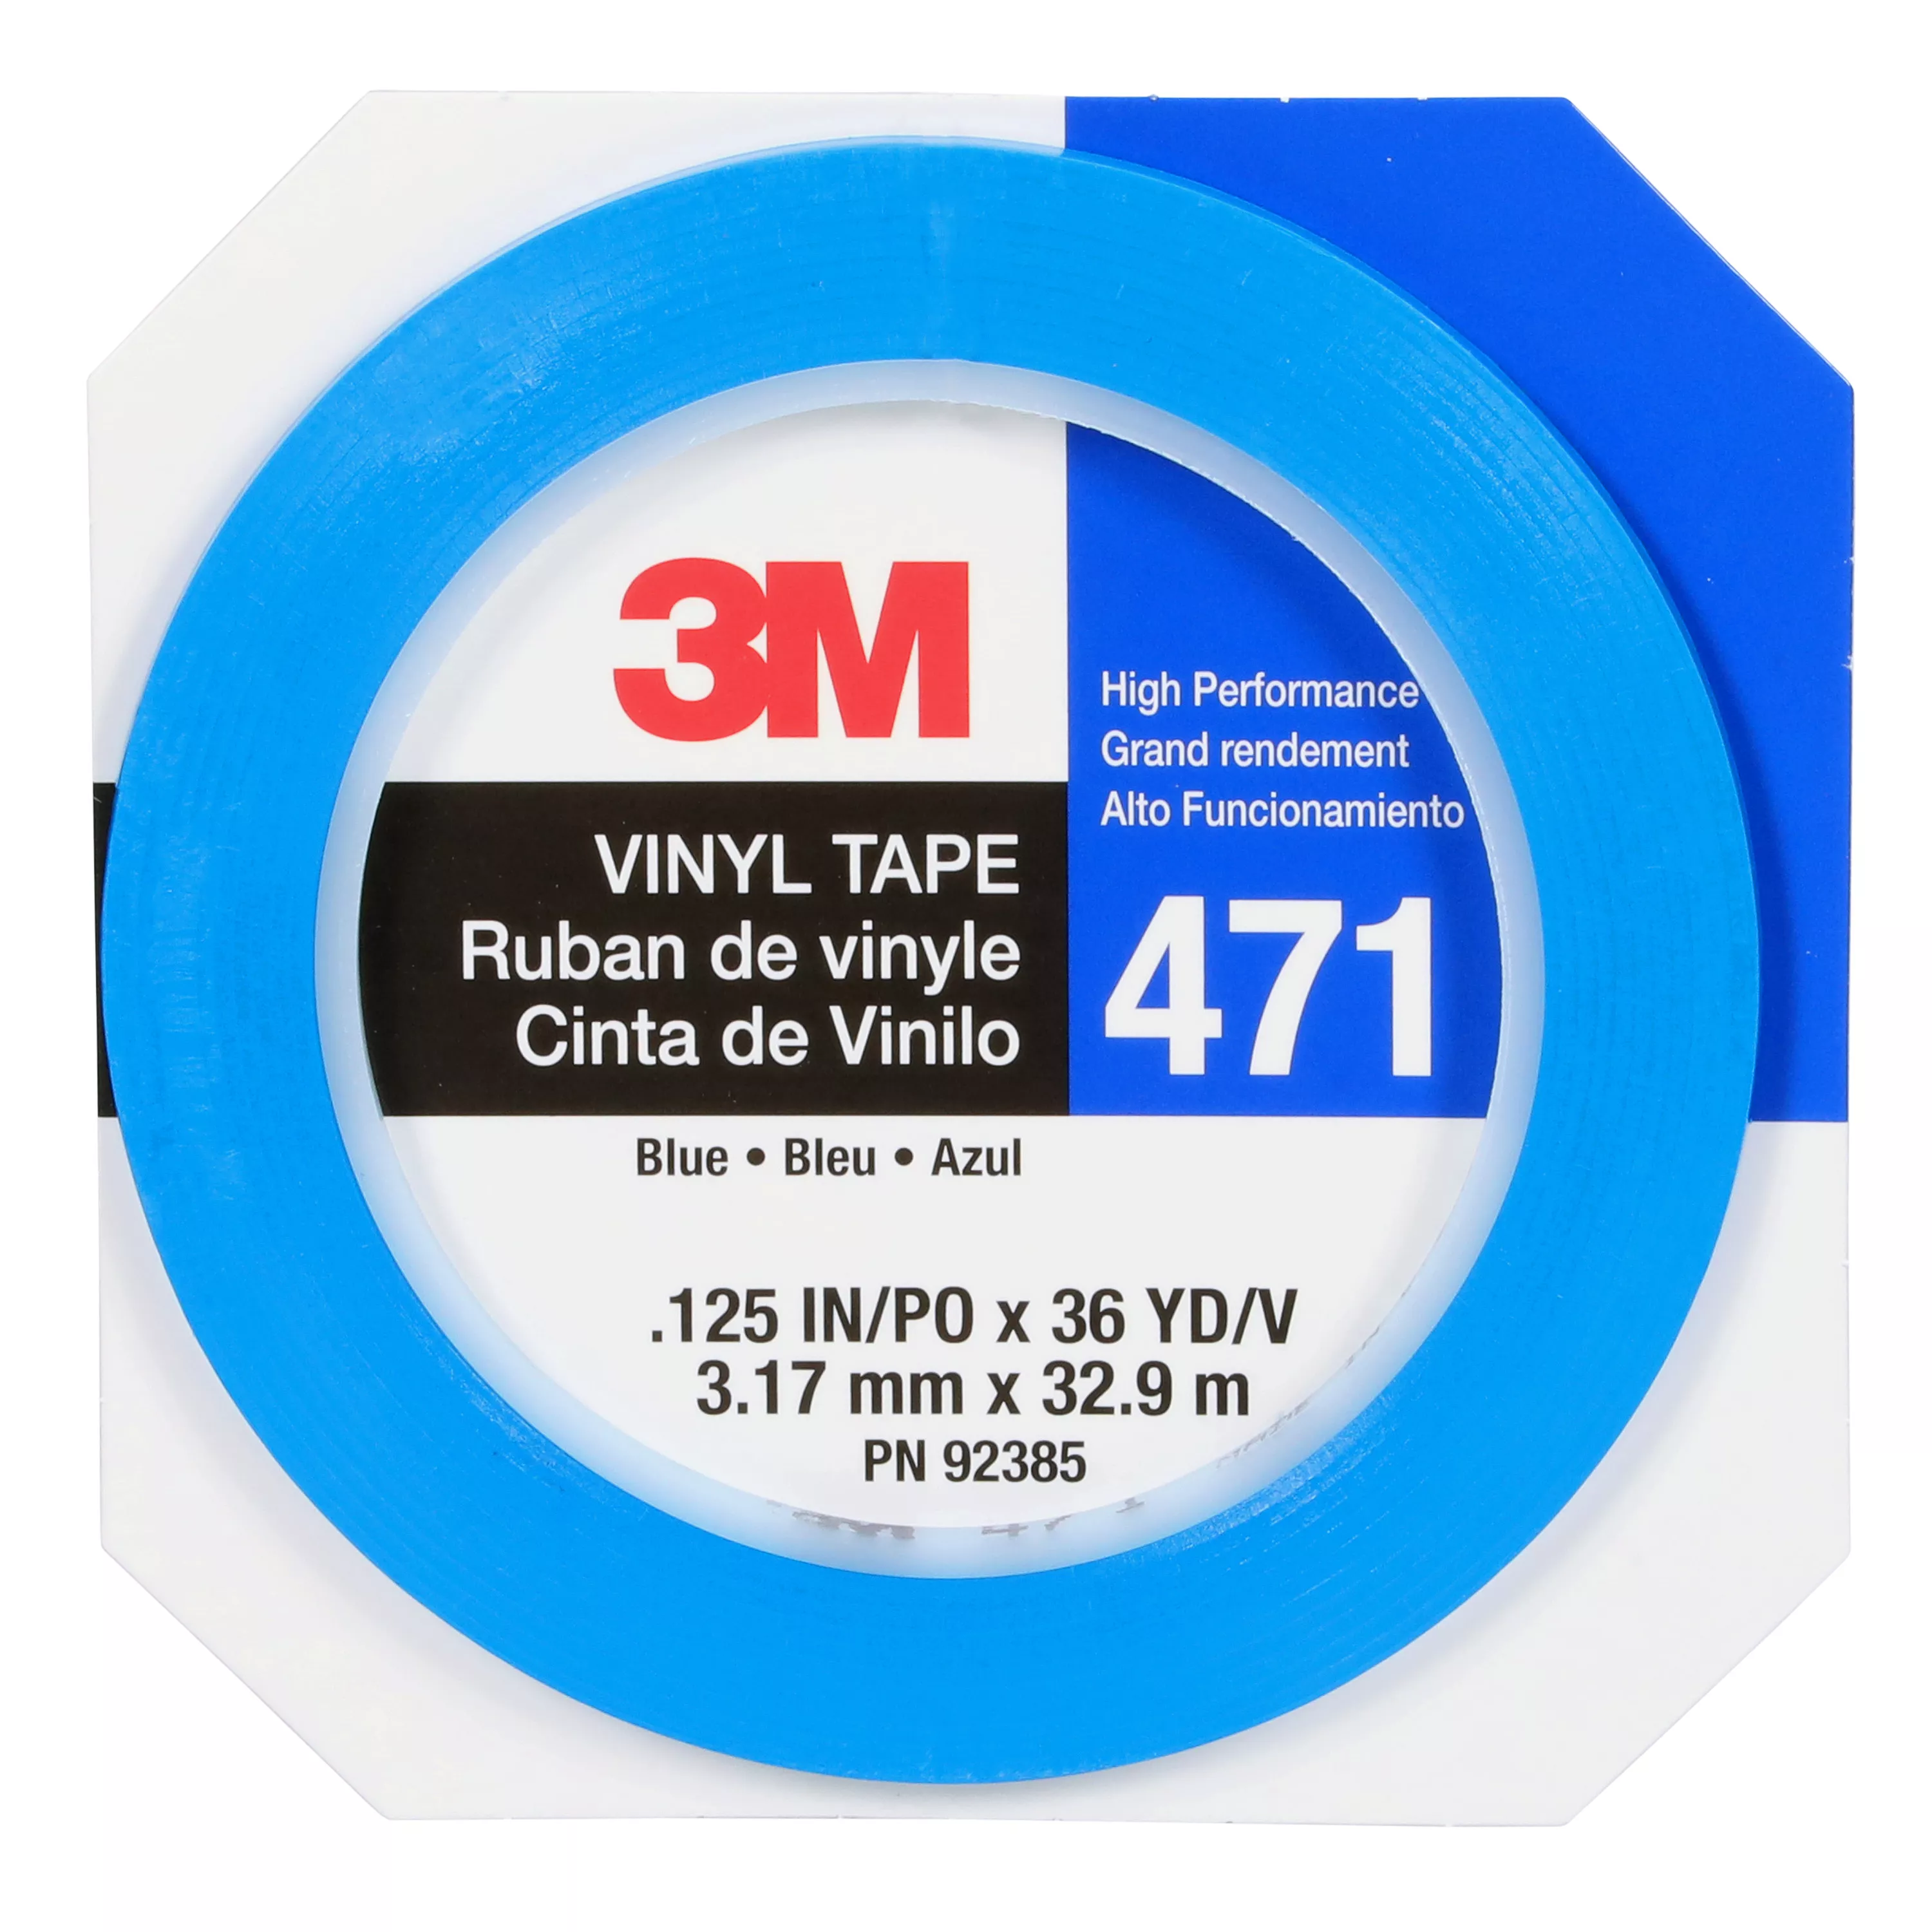 Product Number 471 | 3M™ Vinyl Tape 471